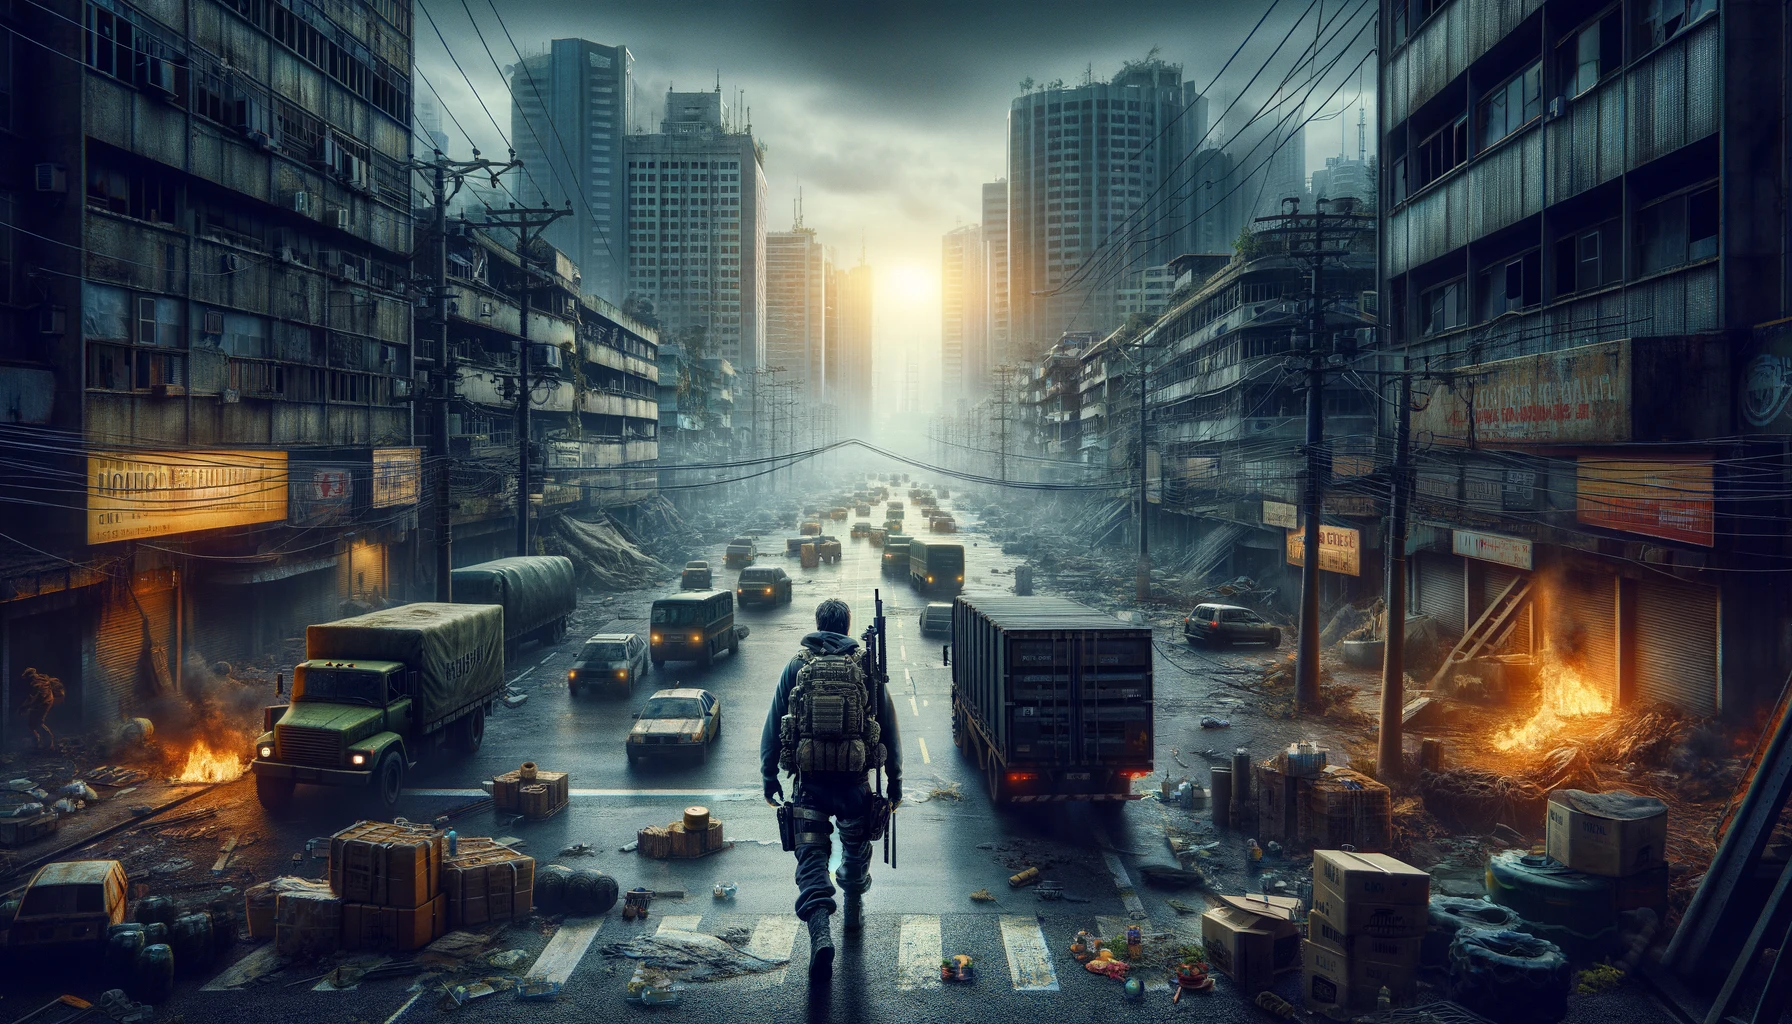 Prepper navigating through an urban SHTF scenario with blocked roads and scarcity of resources, showcasing urban survival skills in a desolate cityscape